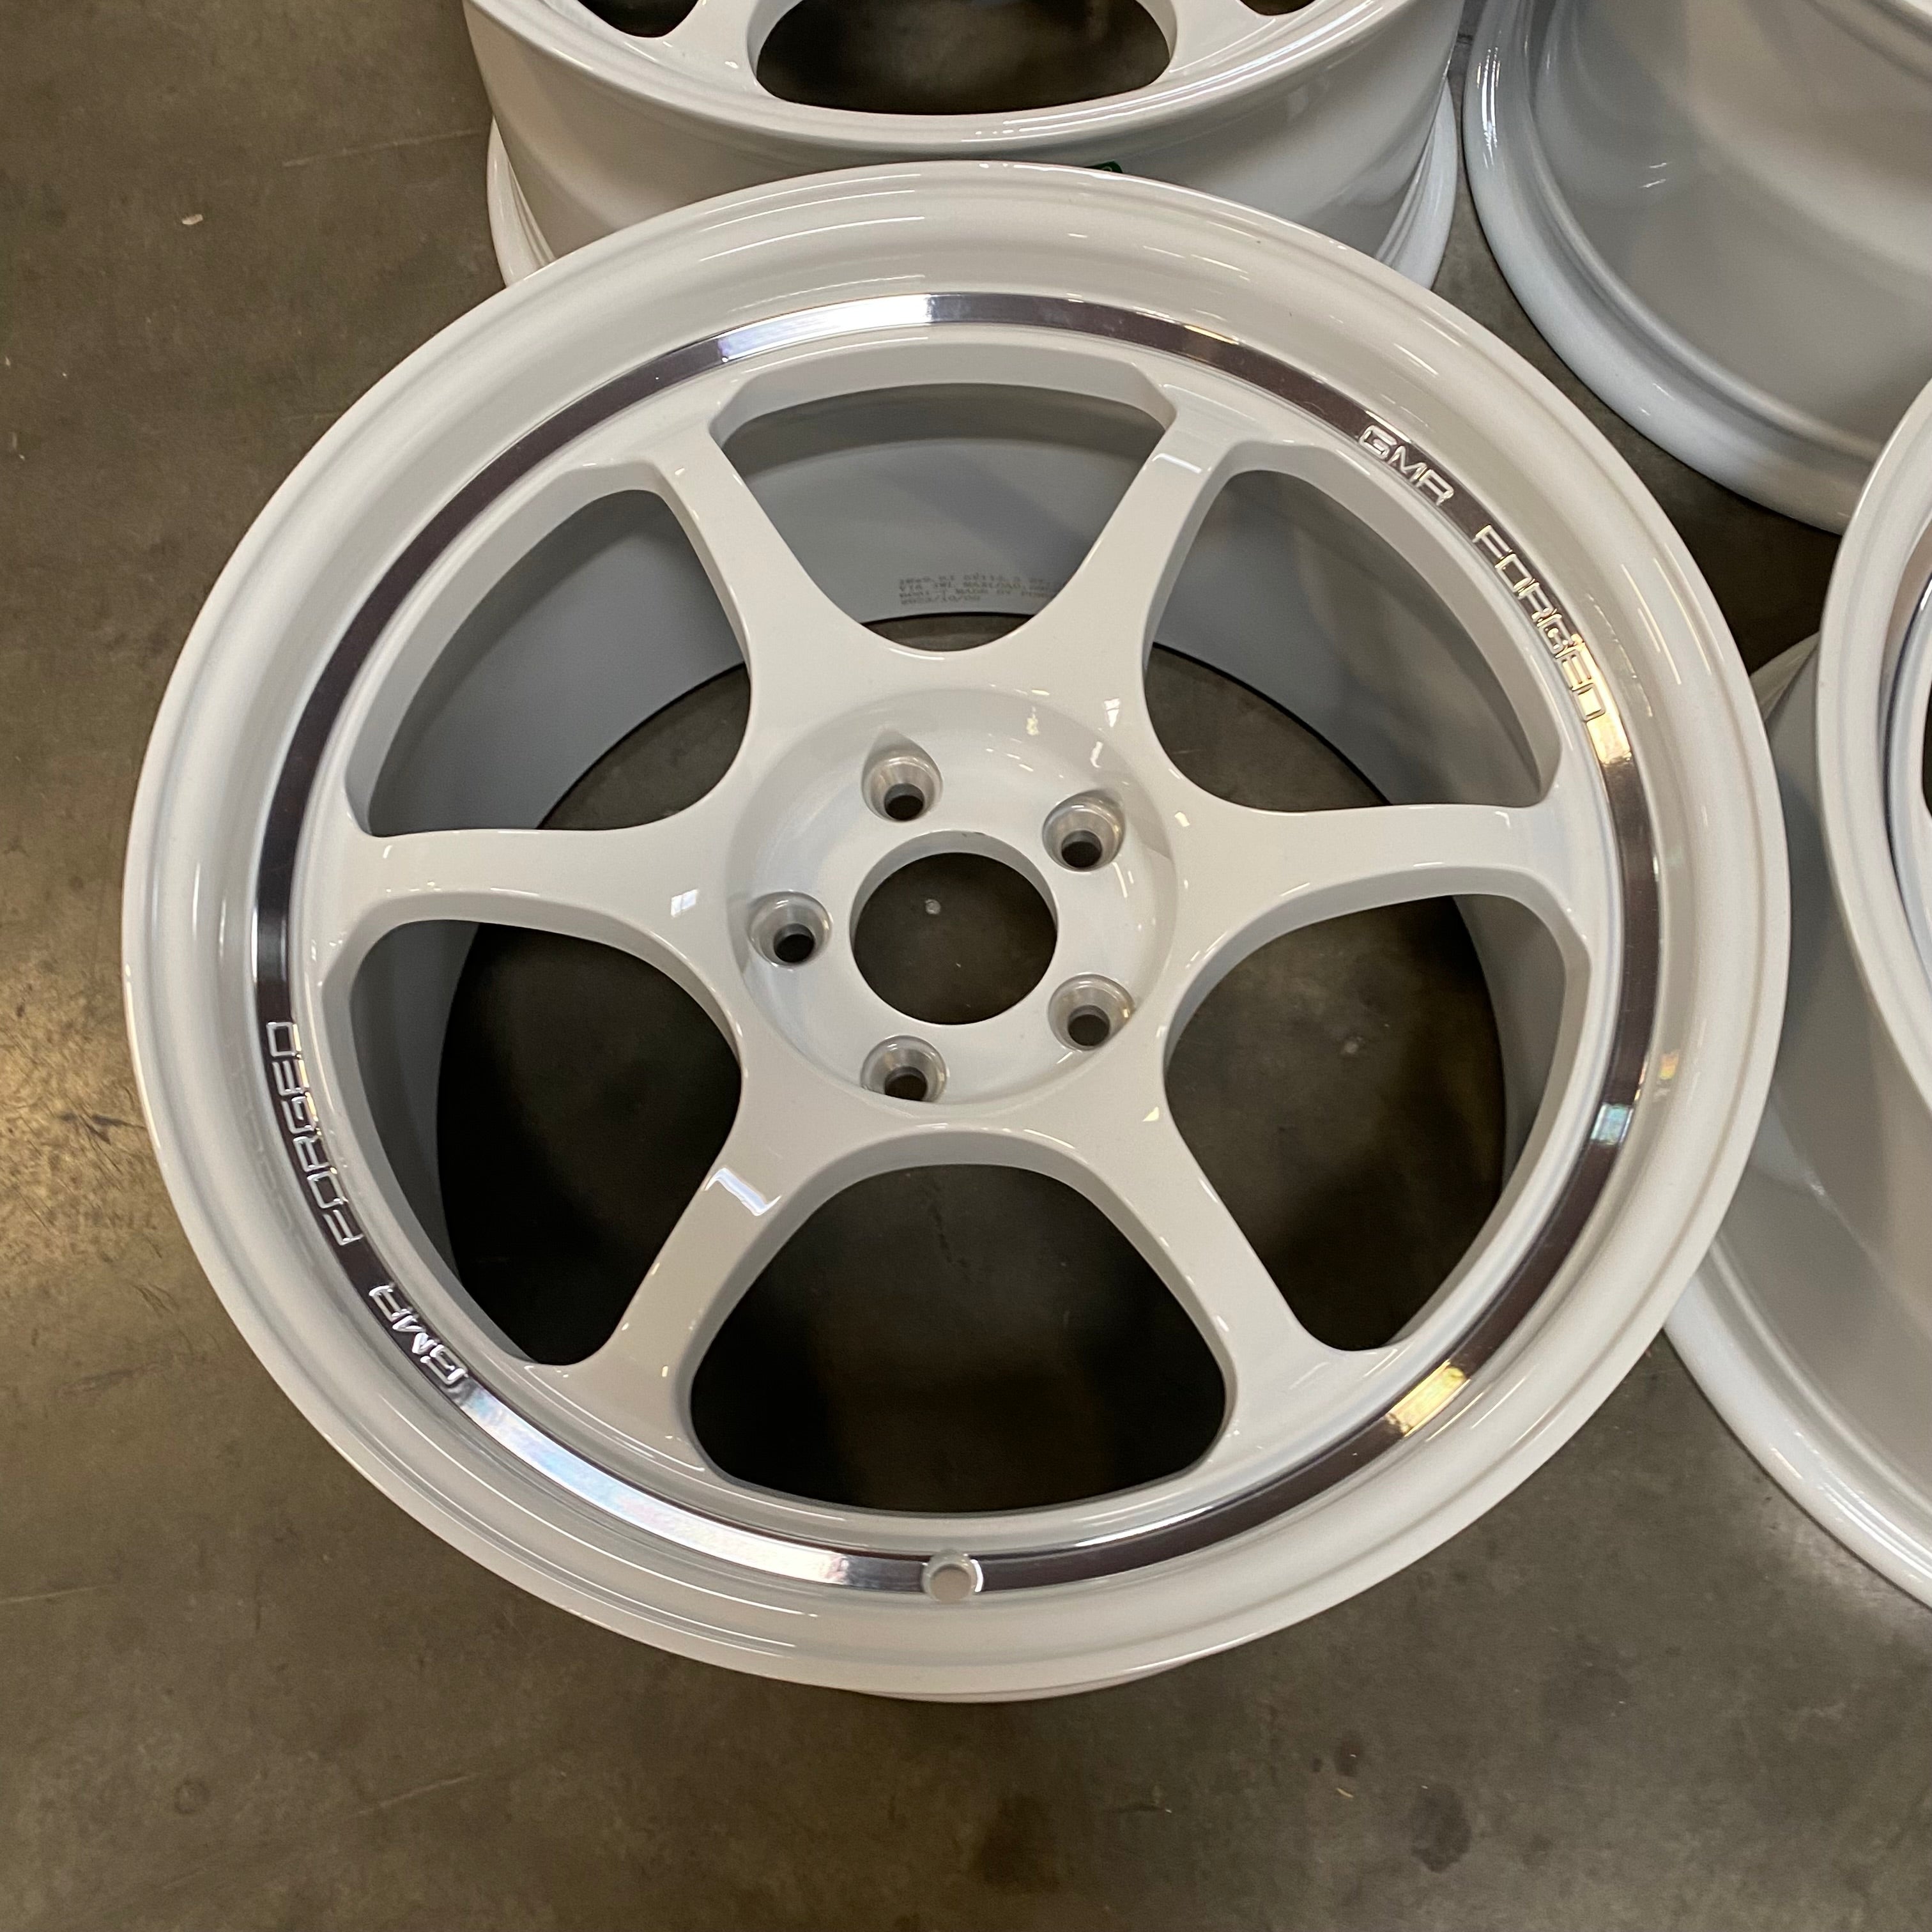 18” R1 Forged - In Stock Set